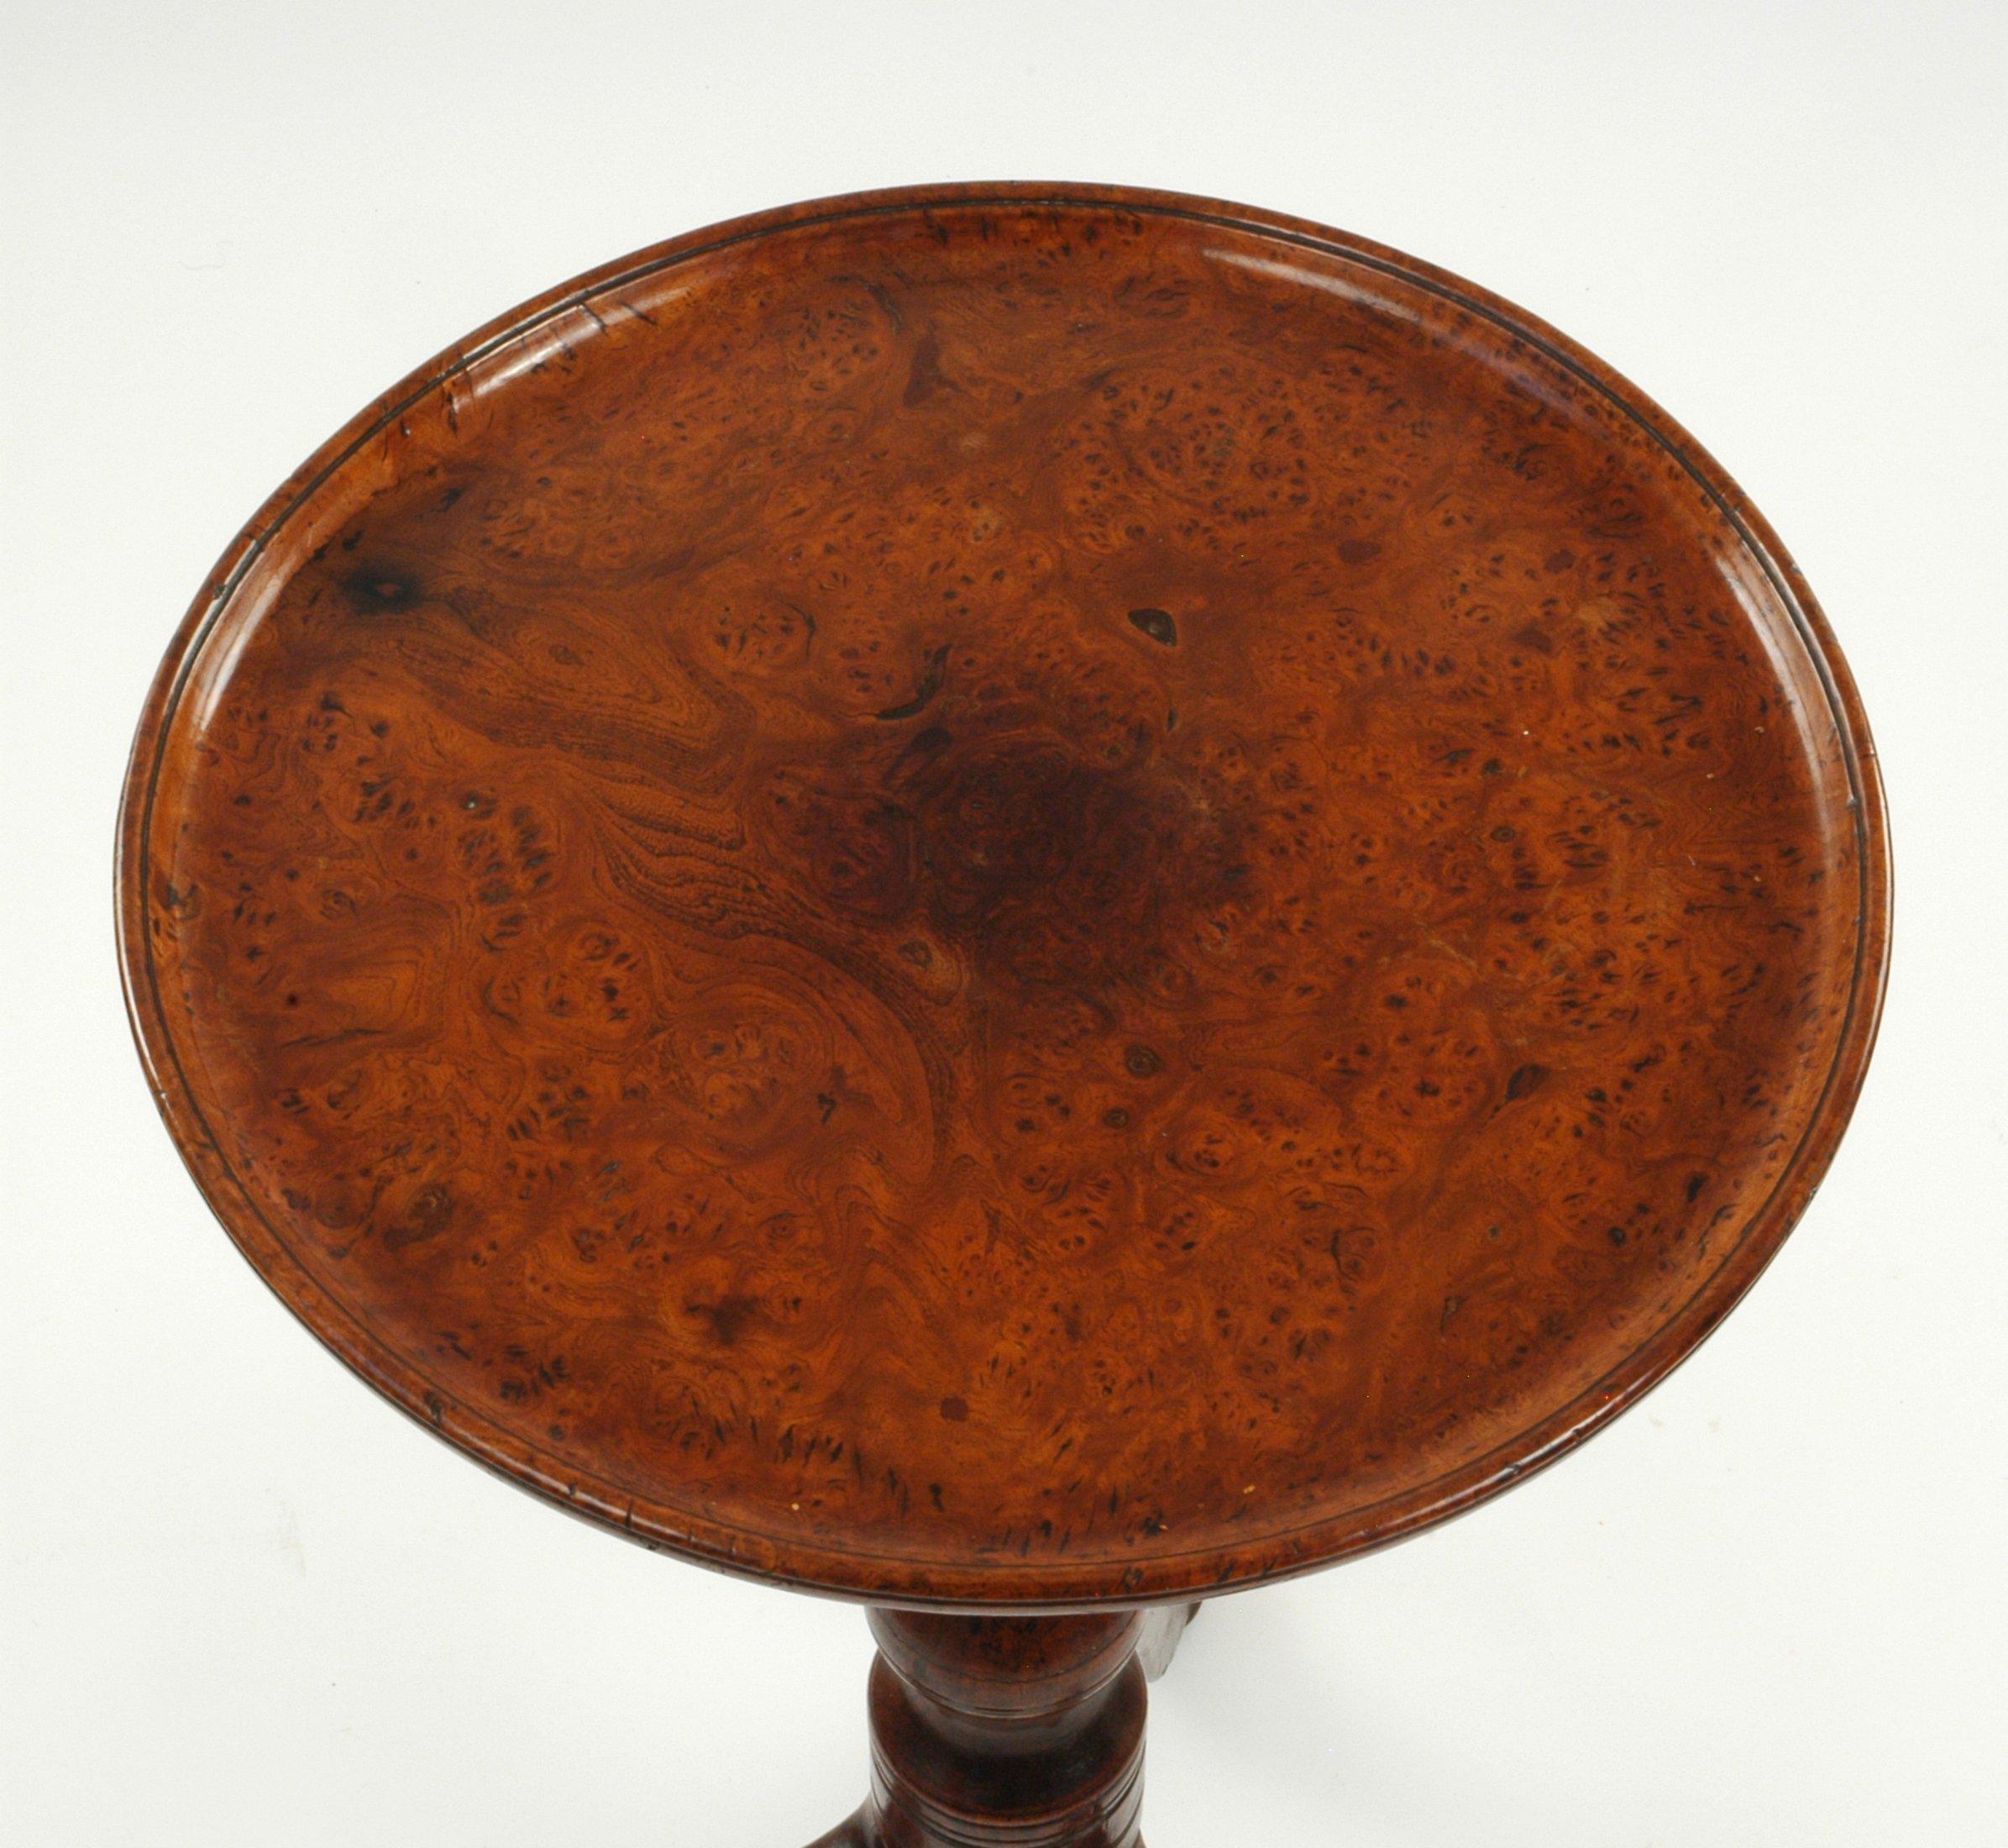 Of solid burr elm the single piece top screws to the turned walnut column on tripod legs terminating in pointed pad feet. This superb example of English country furniture has a fine rich color and is enhanced by the gently undulating top. A truly